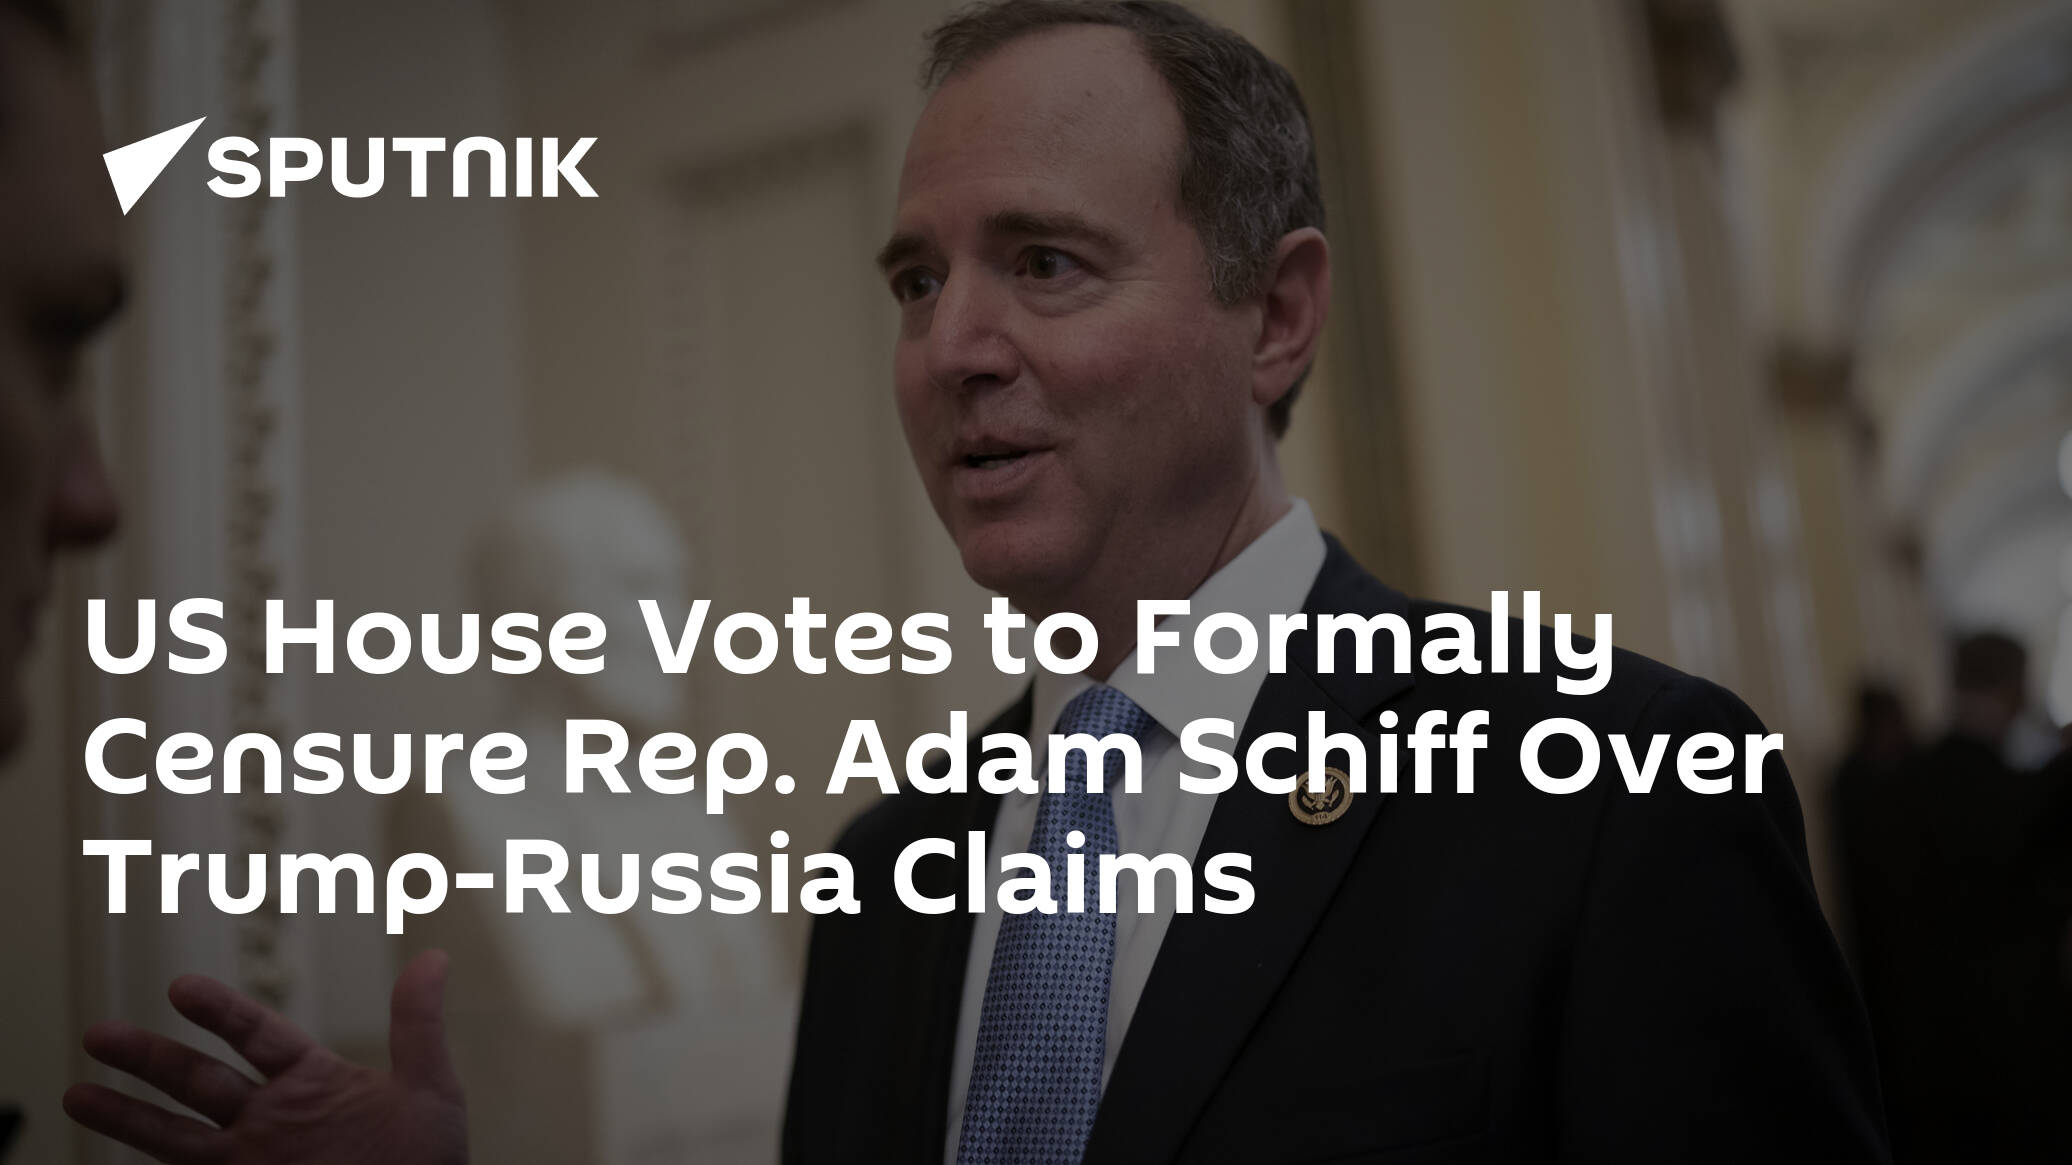 US House Votes to Formally Censure Rep. Adam Schiff Over Trump-Russia Claims